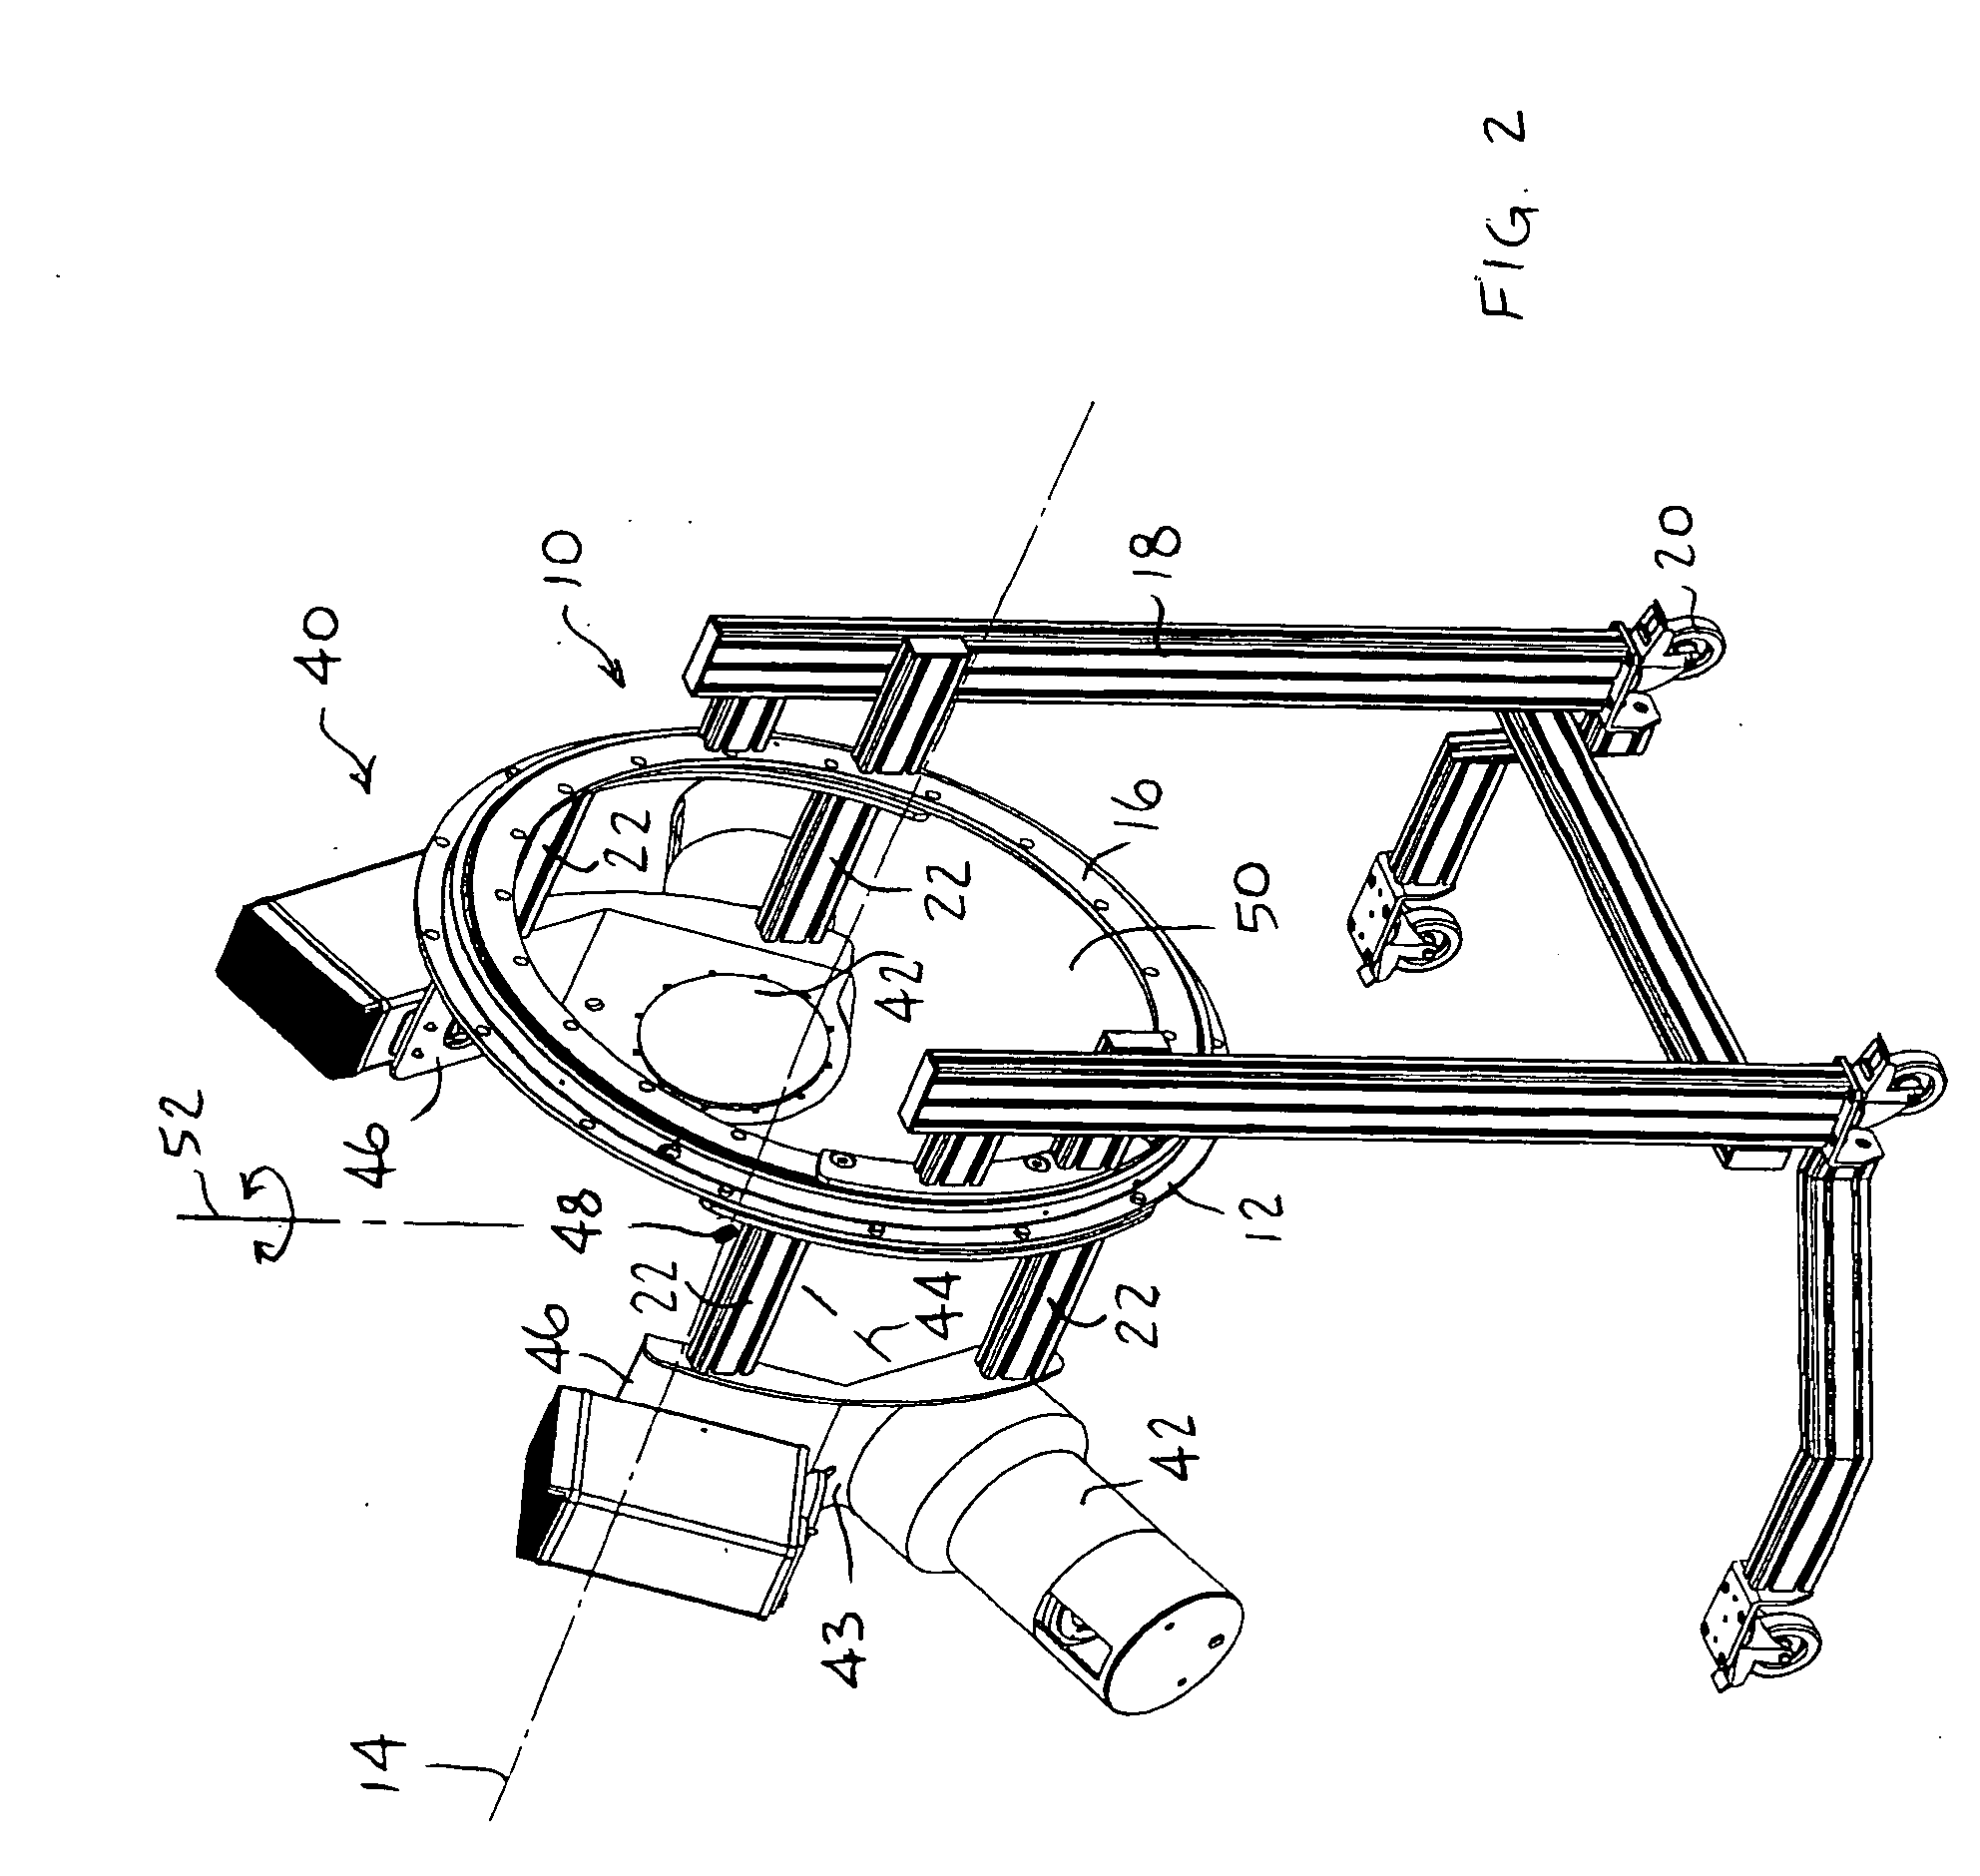 Imaging and treatment system